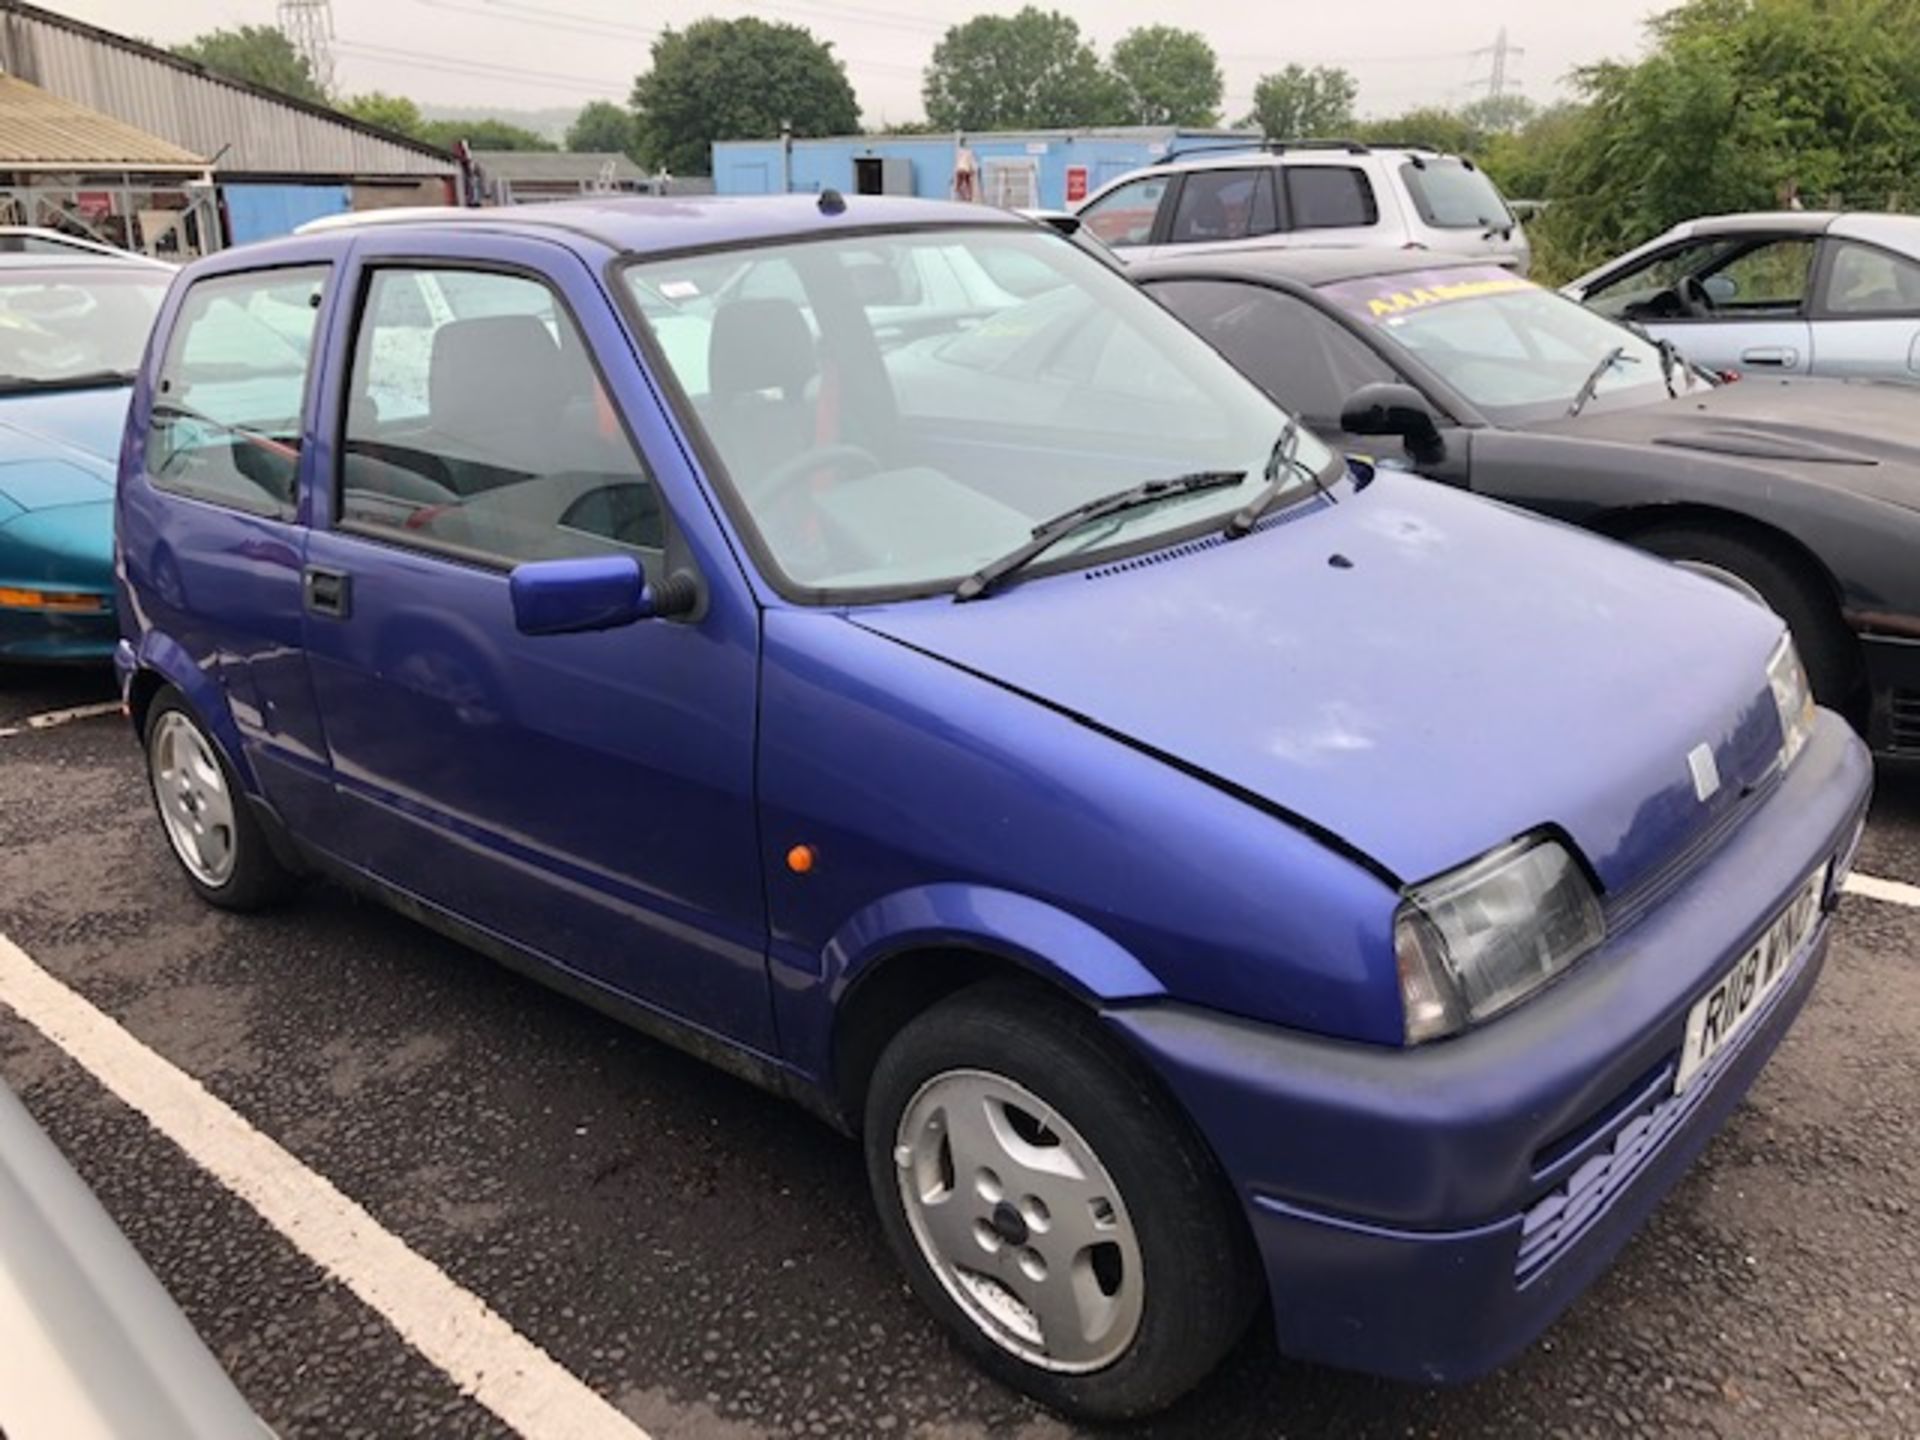 Fiat Cinquecento Reg No R118 WND 2 door in blue. We have V5 and keys, this vehicle started very - Image 3 of 6